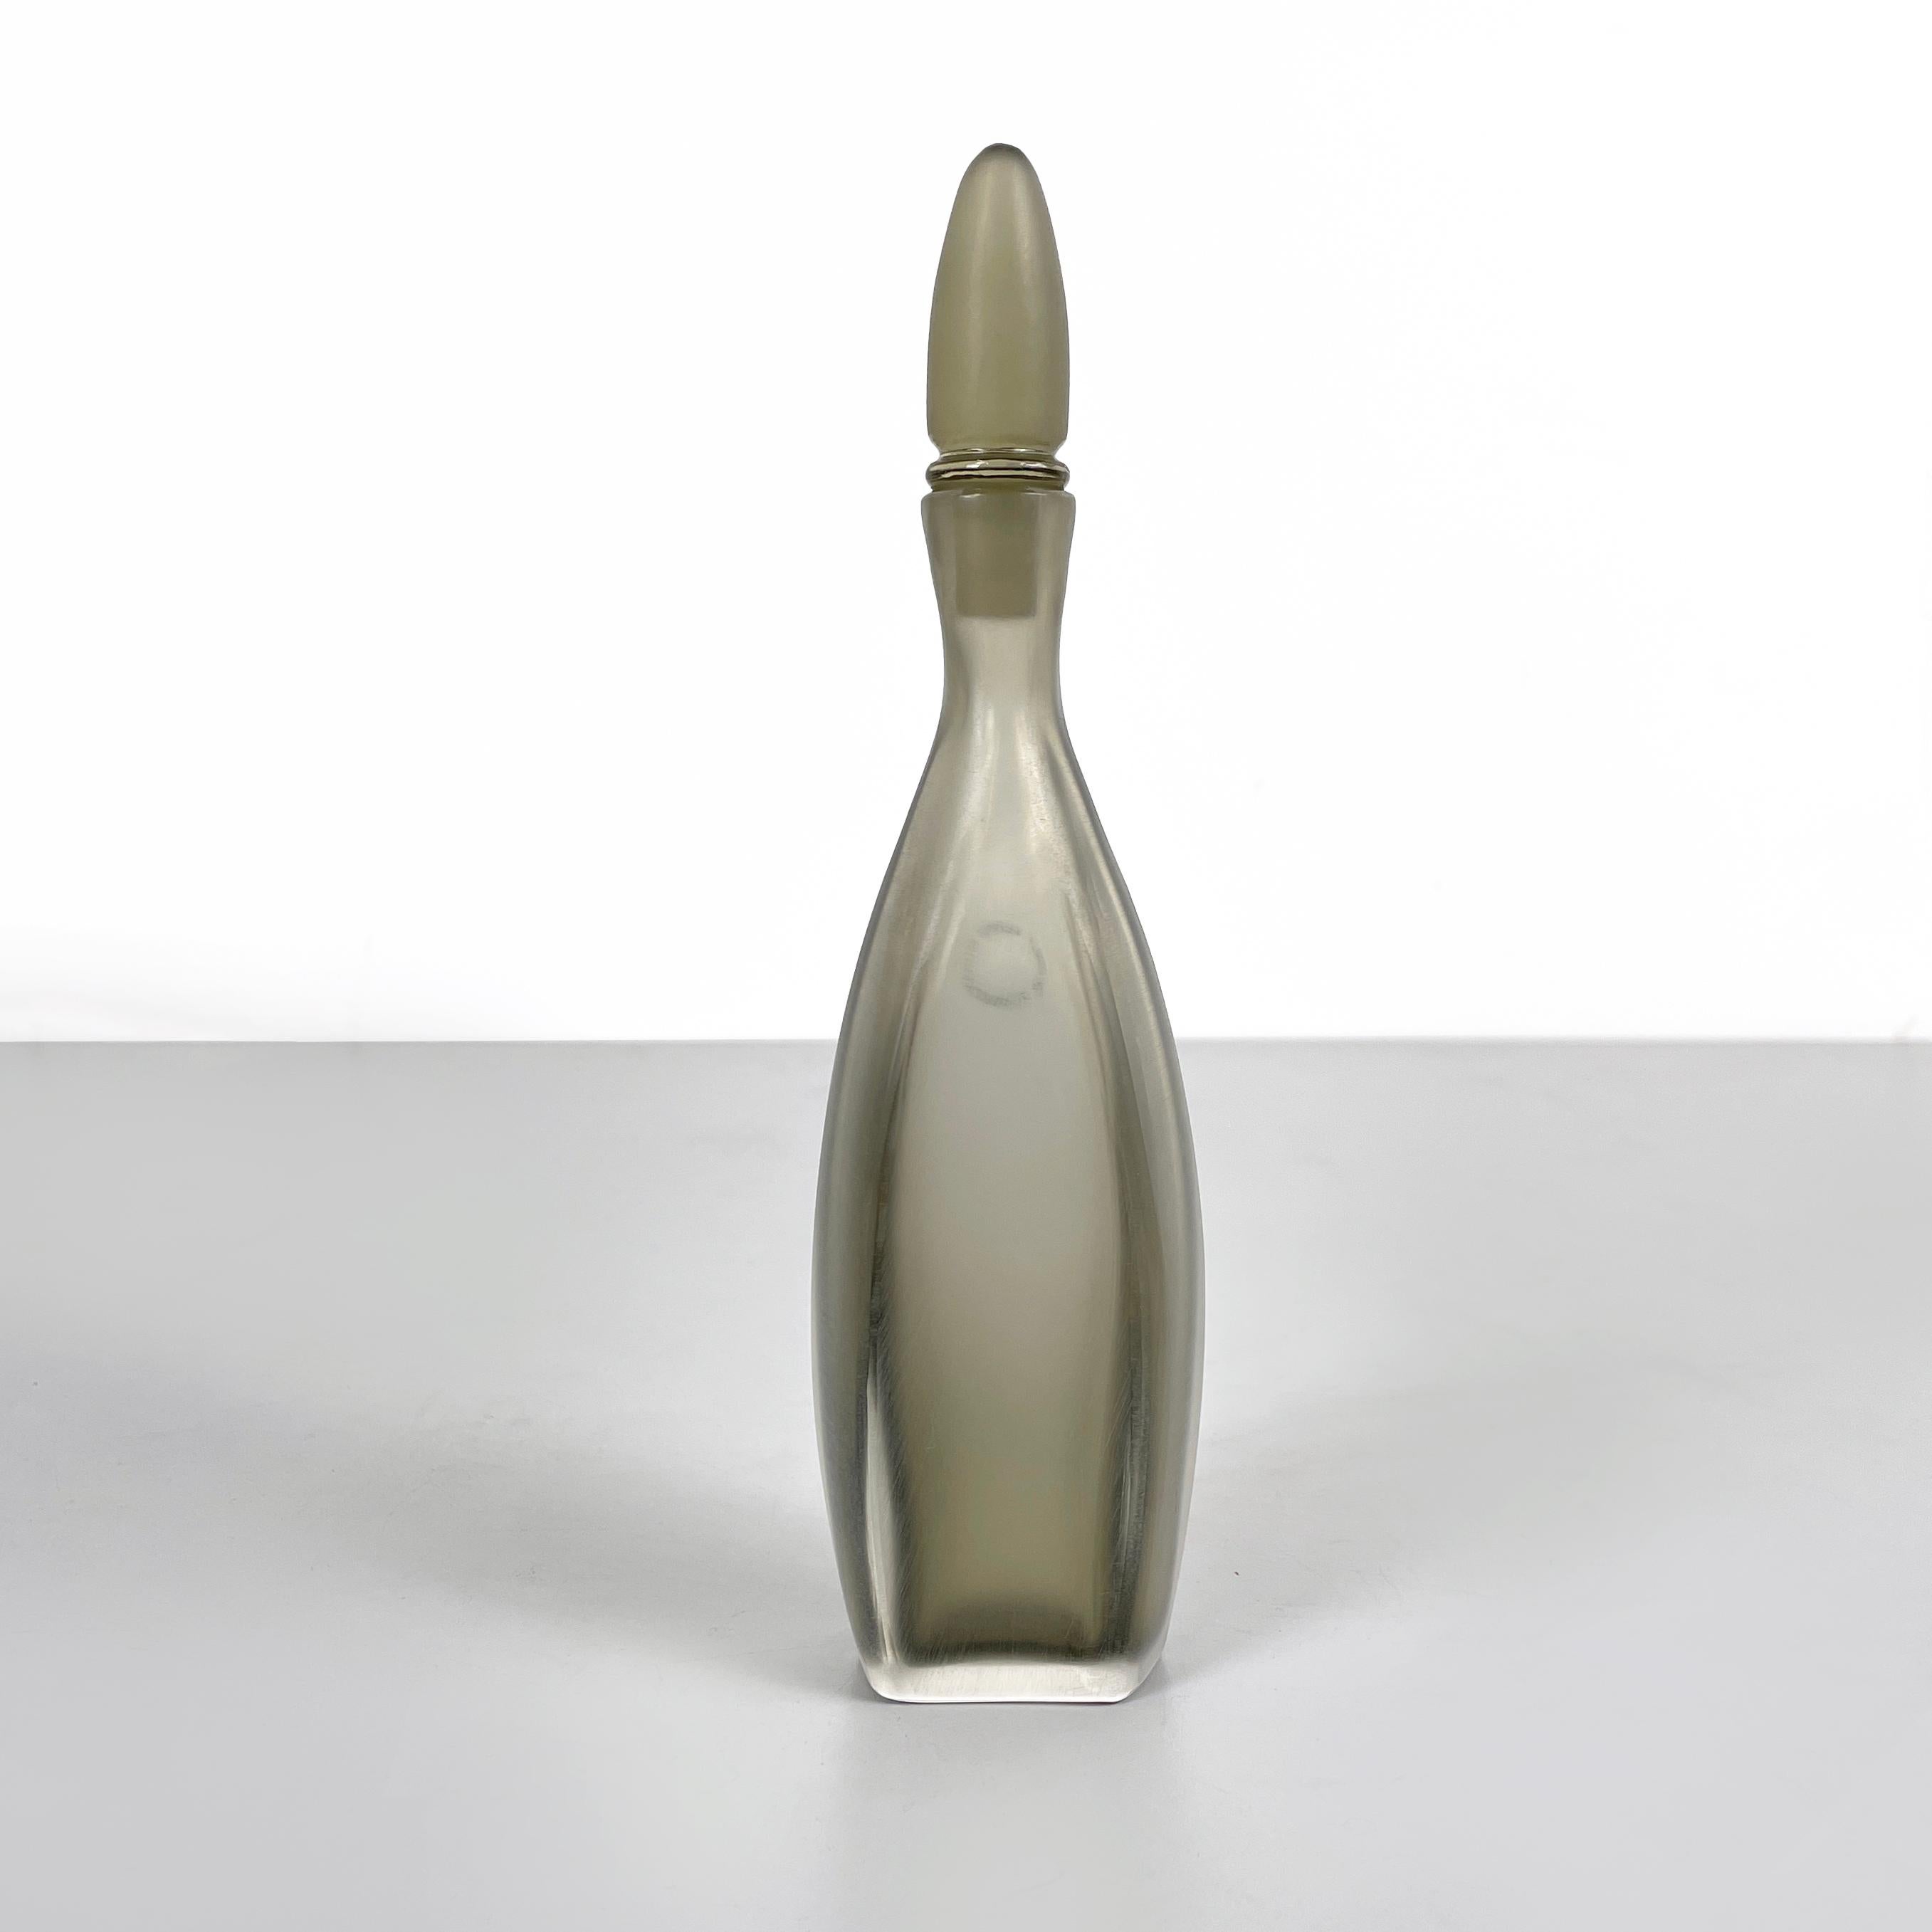 Italian modern Decorative bottle with cap in gray Murano glass by Venini, 1990s
Decorative bottle with a square base, in matt gray and transparent Murano glass. The round-based cap has a tapered and elongated shape. The bottle tends to widen in the